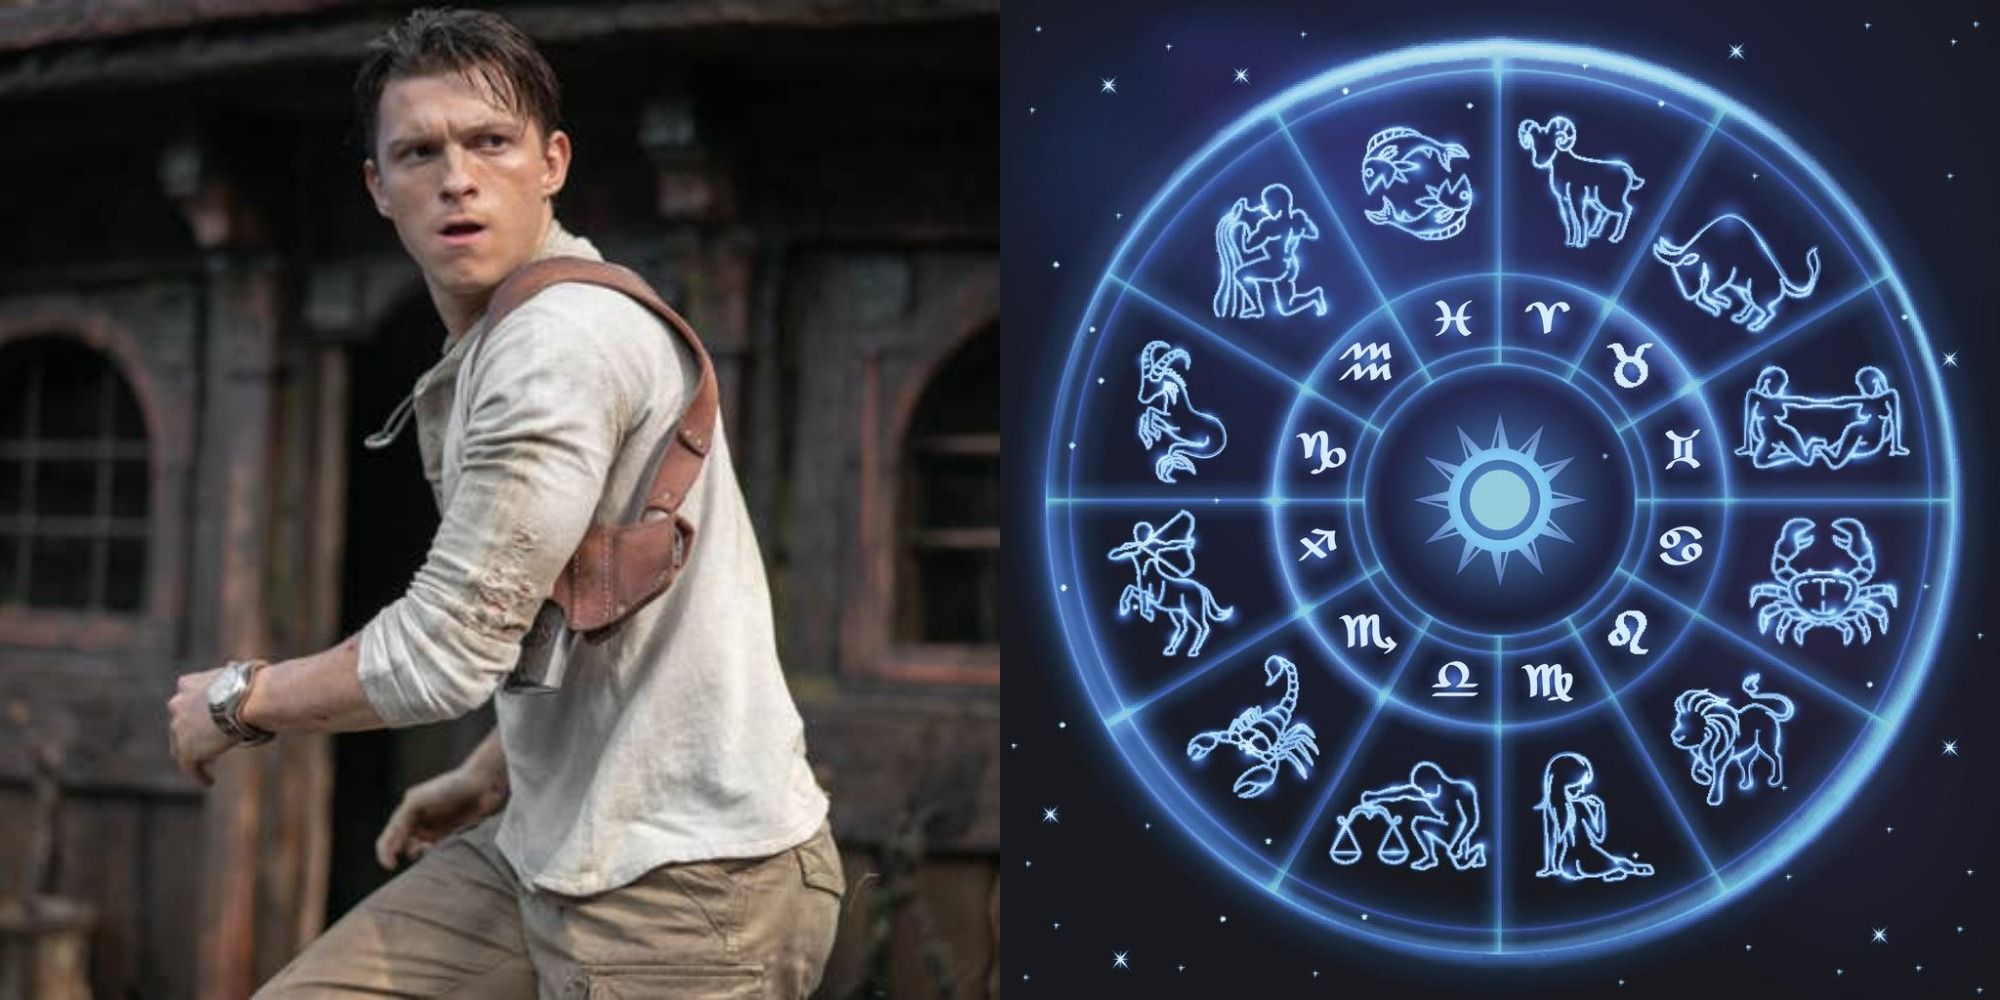 Split image showing Nathan Drake in Uncharted and a zodiac wheel